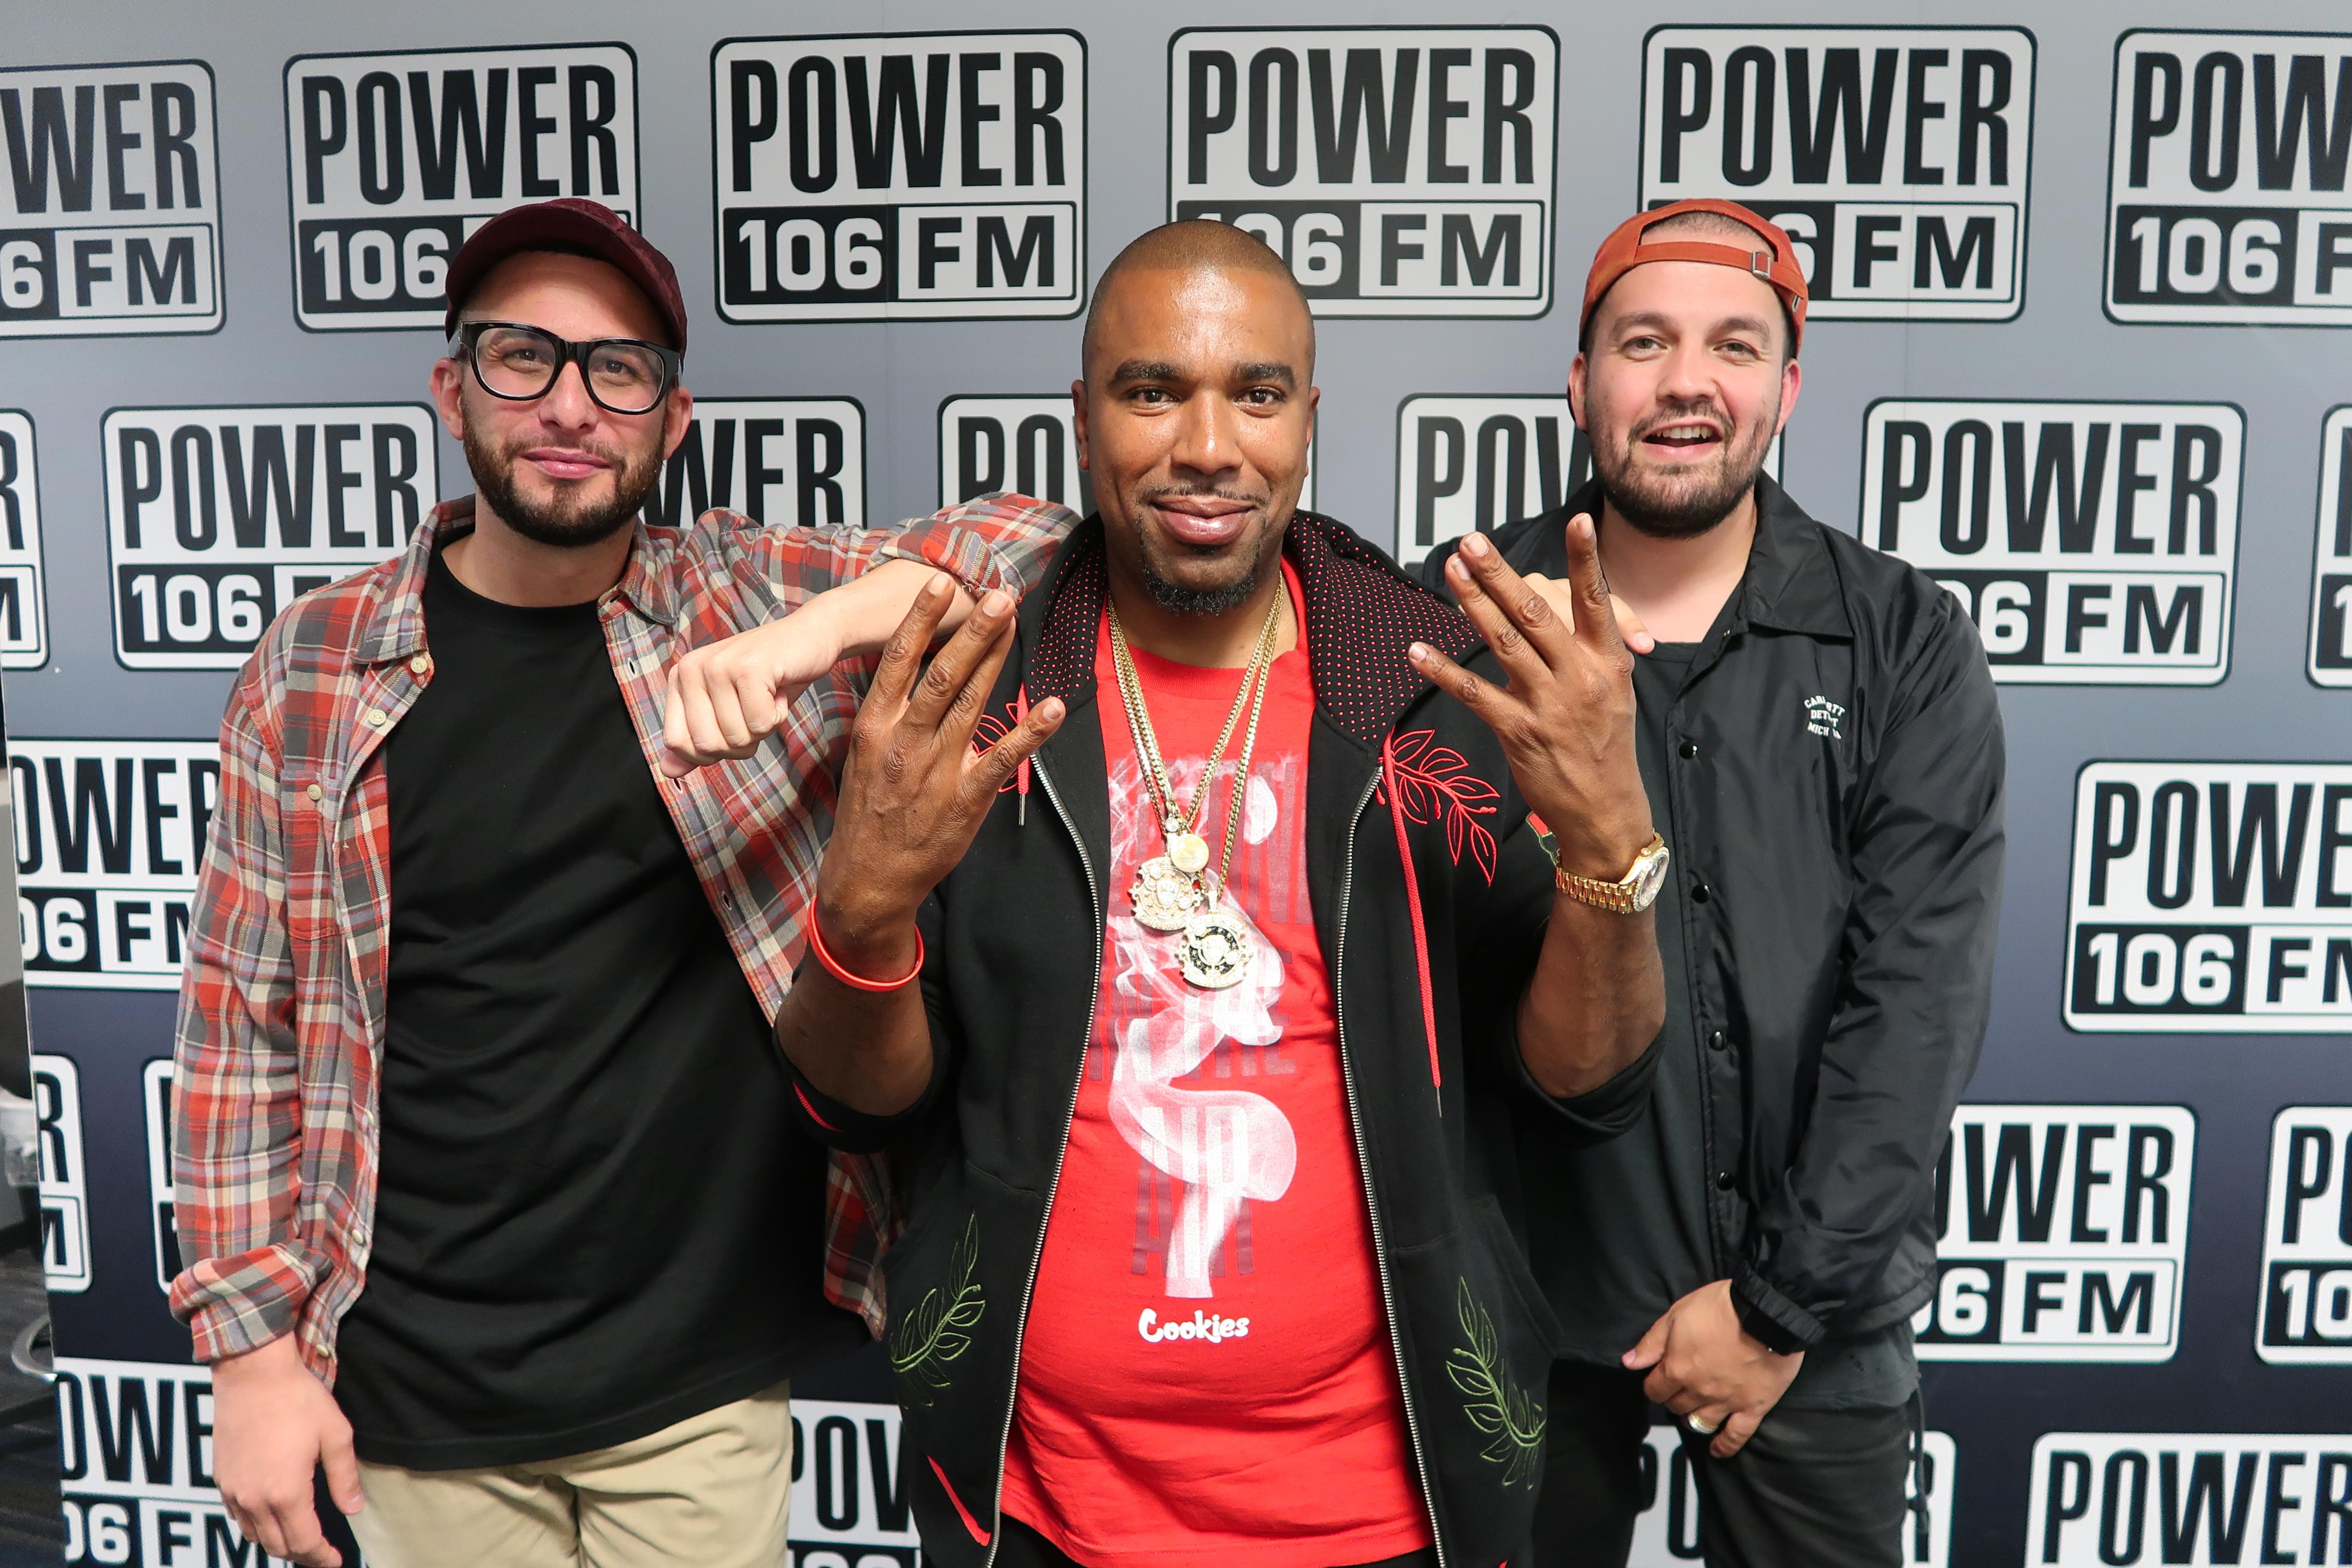 N.O.R.E Stopped By The Liftoff And Spilled Some Juicy Tea With Justin Credible And Dj SourMilk